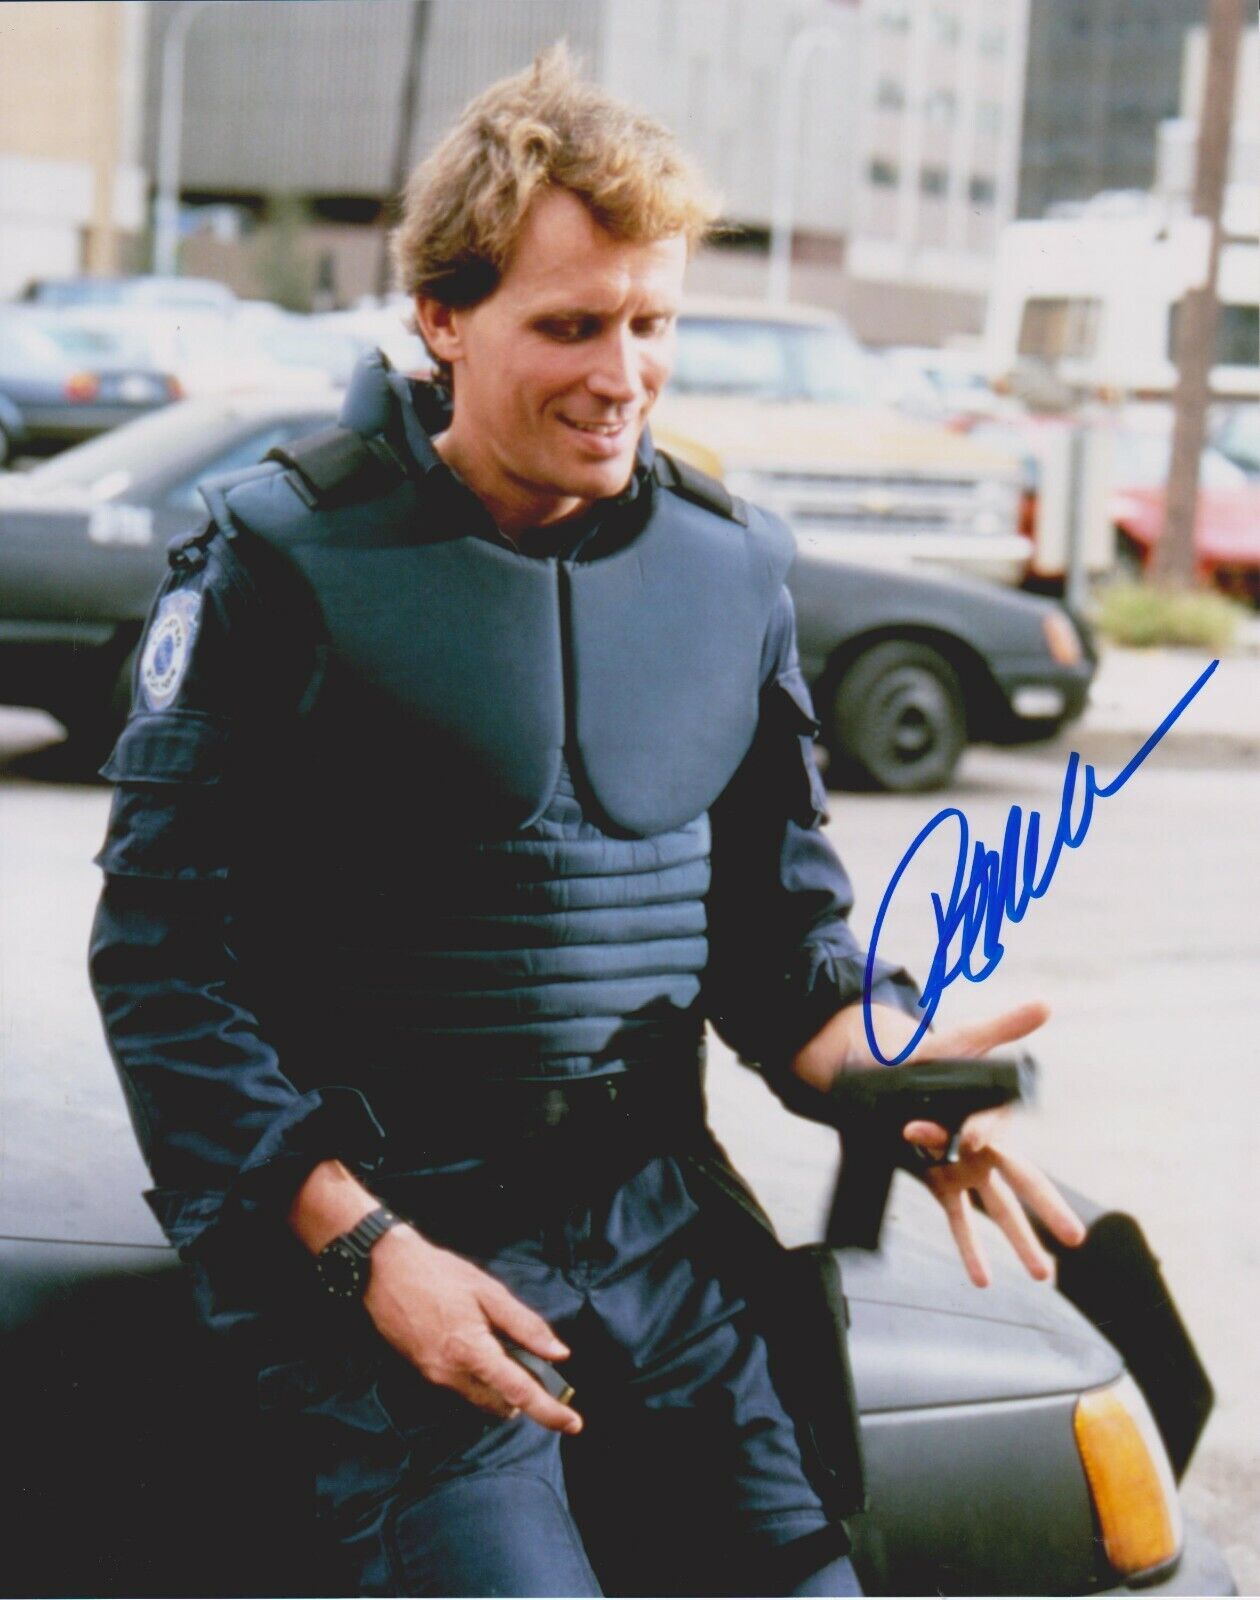 Peter Weller Robocop Original Autographed 8x10 Photo Poster painting #2 signed @HollywoodShow